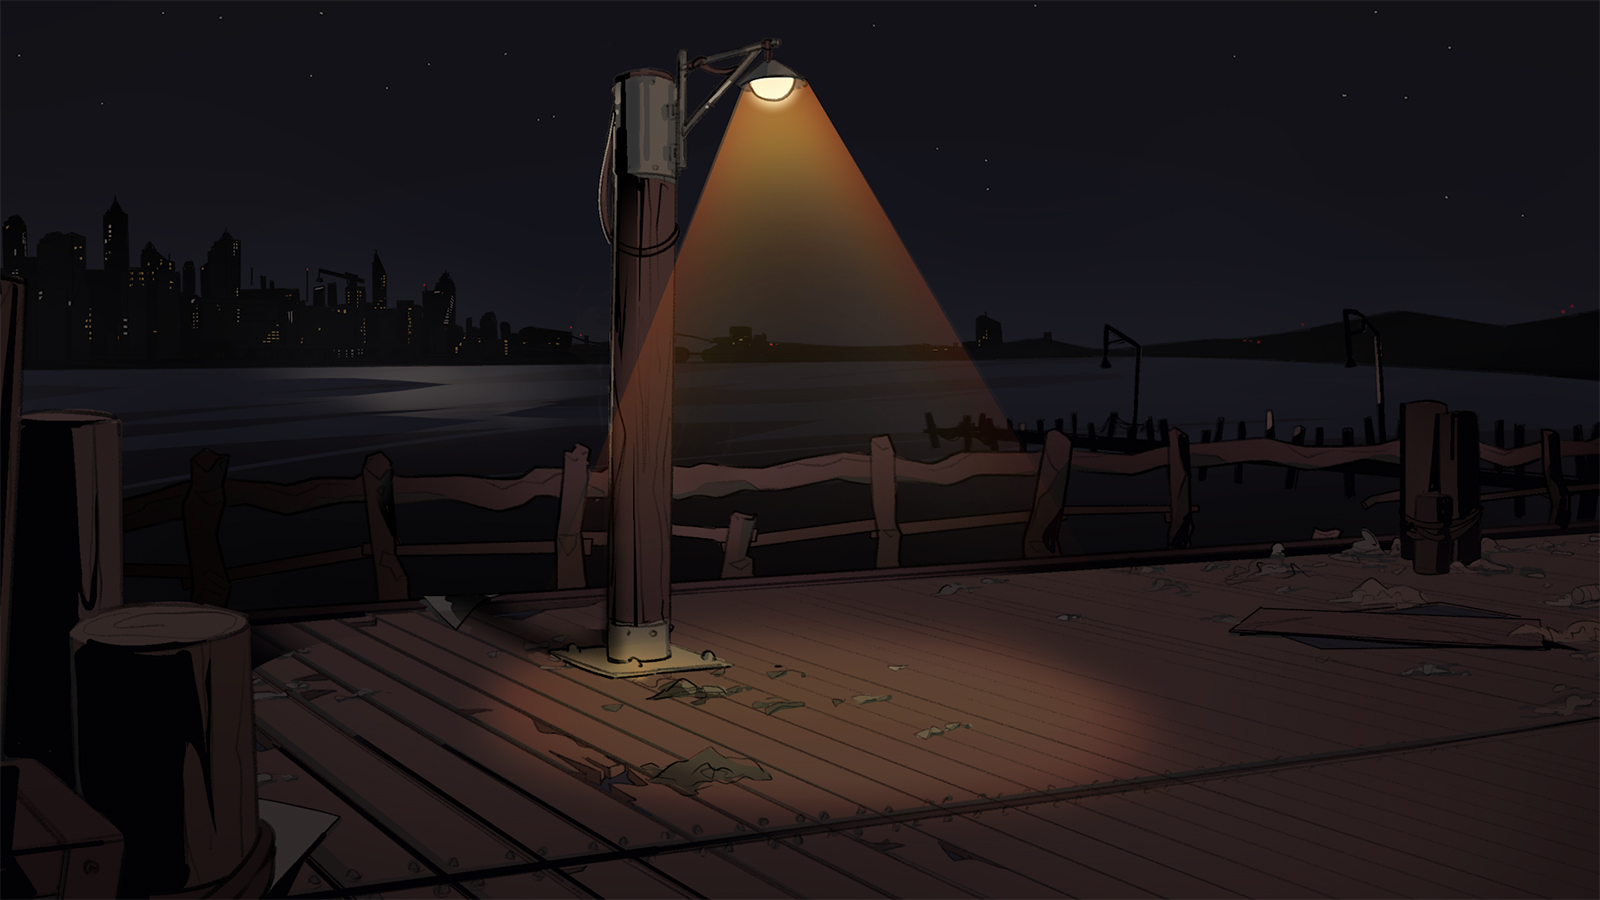 A wooden light post illuminates the littered floor of a city's waterfront.